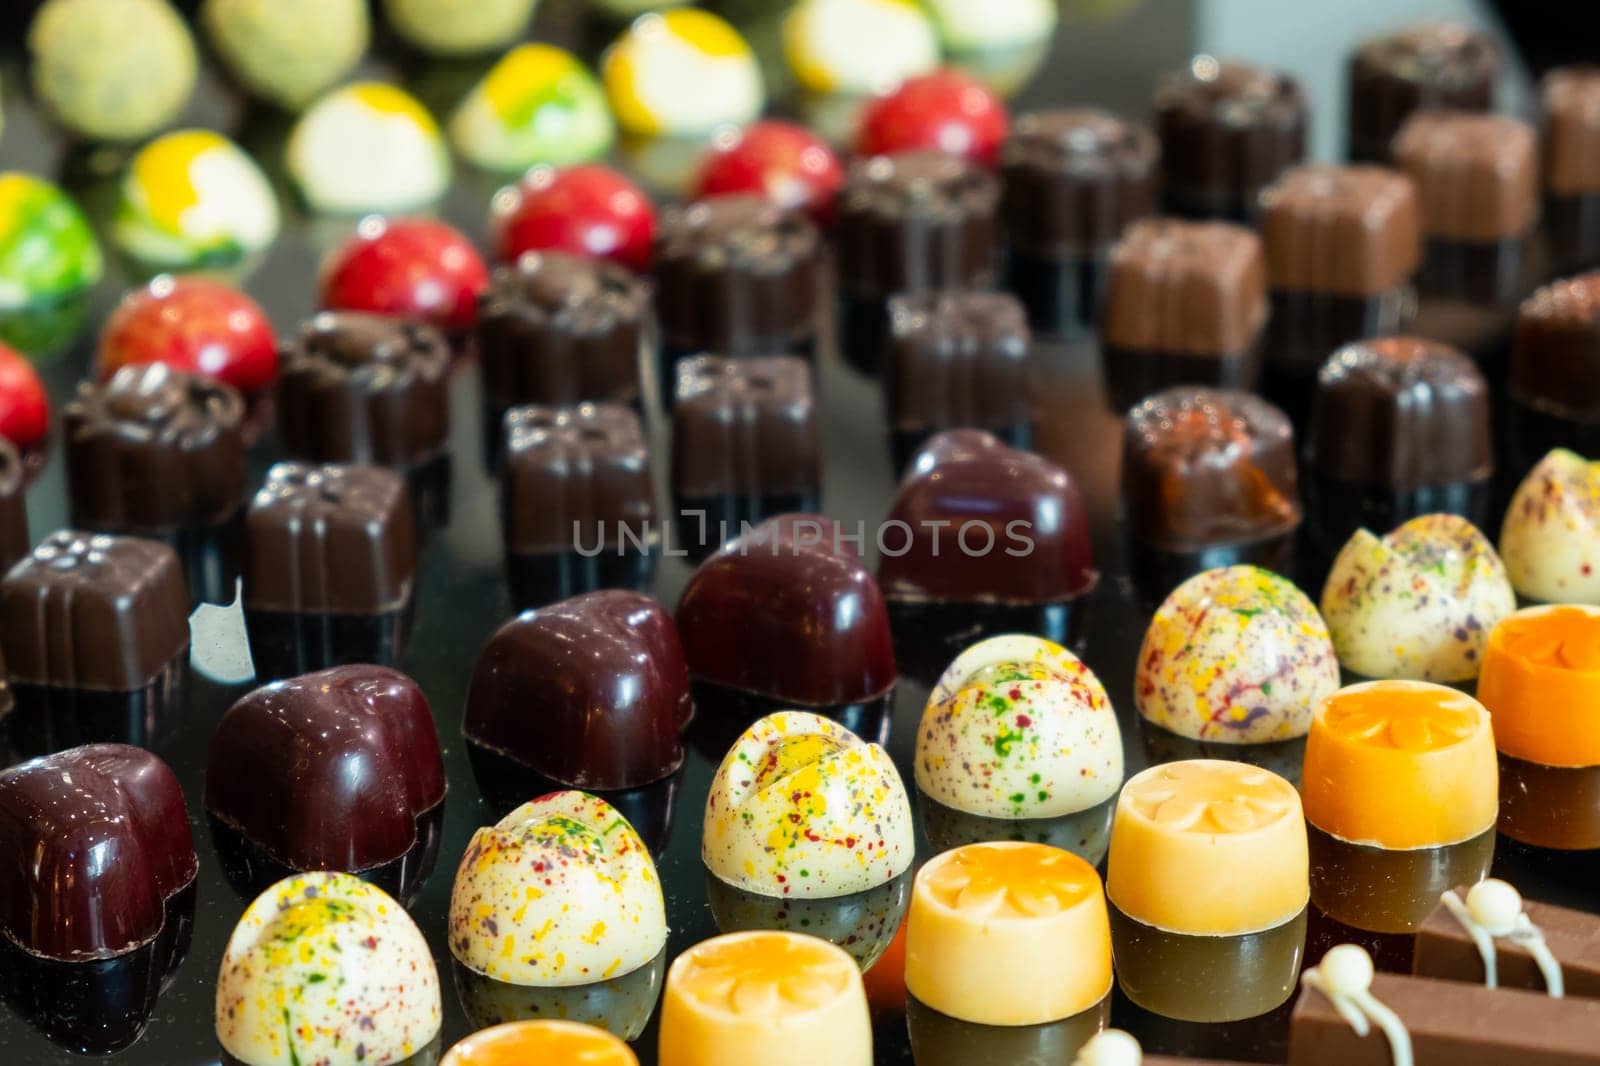 Colorful chocolate candies with different flavors. Exclusive delicious handmade sweets by vladimka